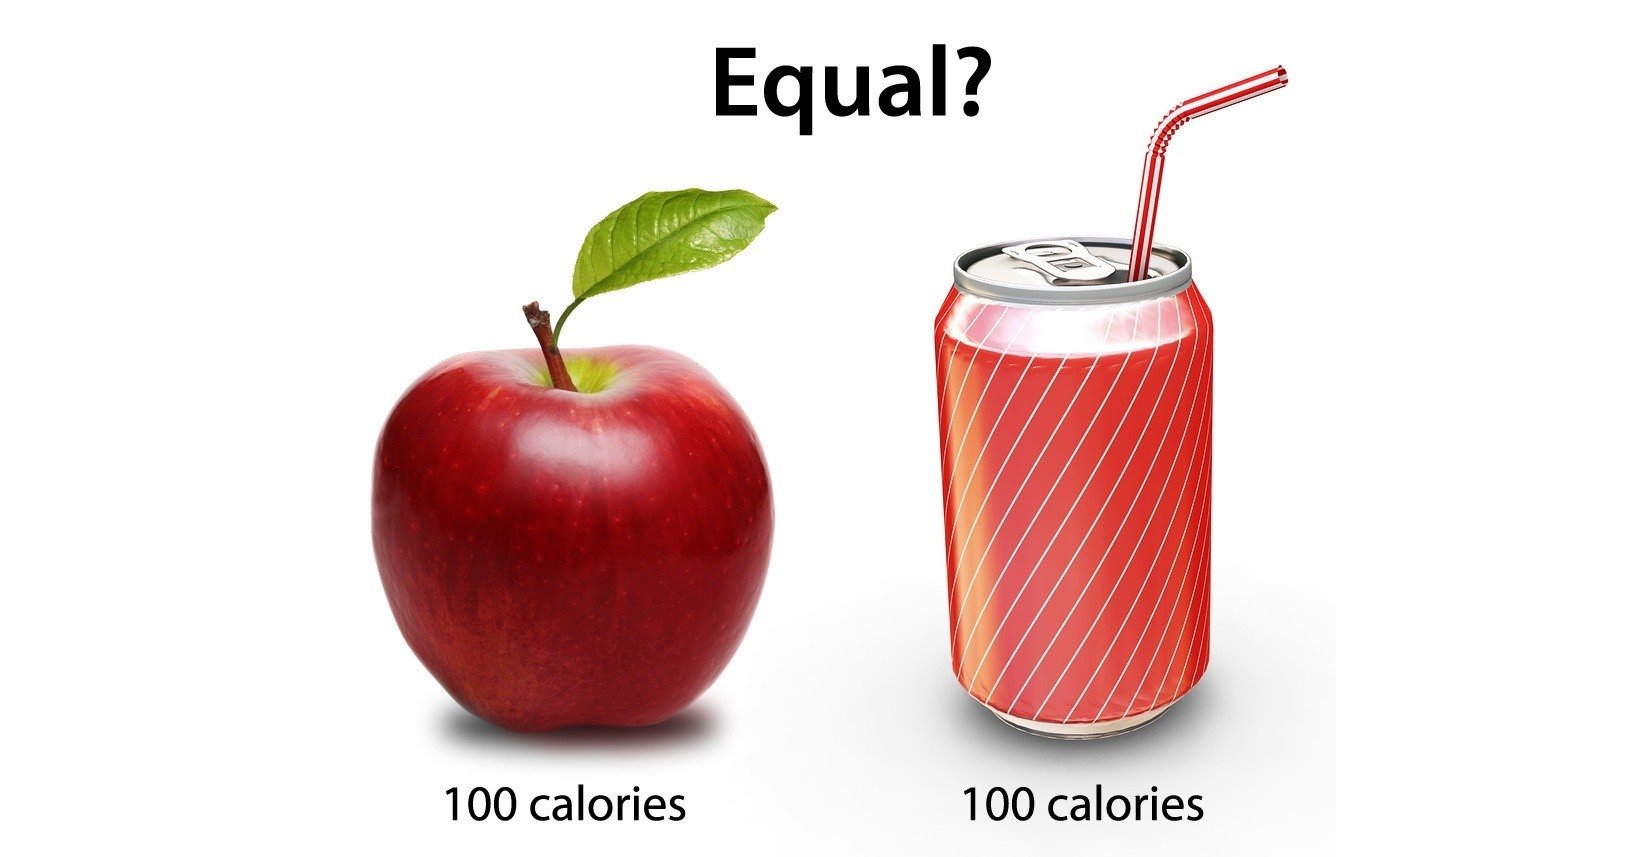 Are all calories equal?